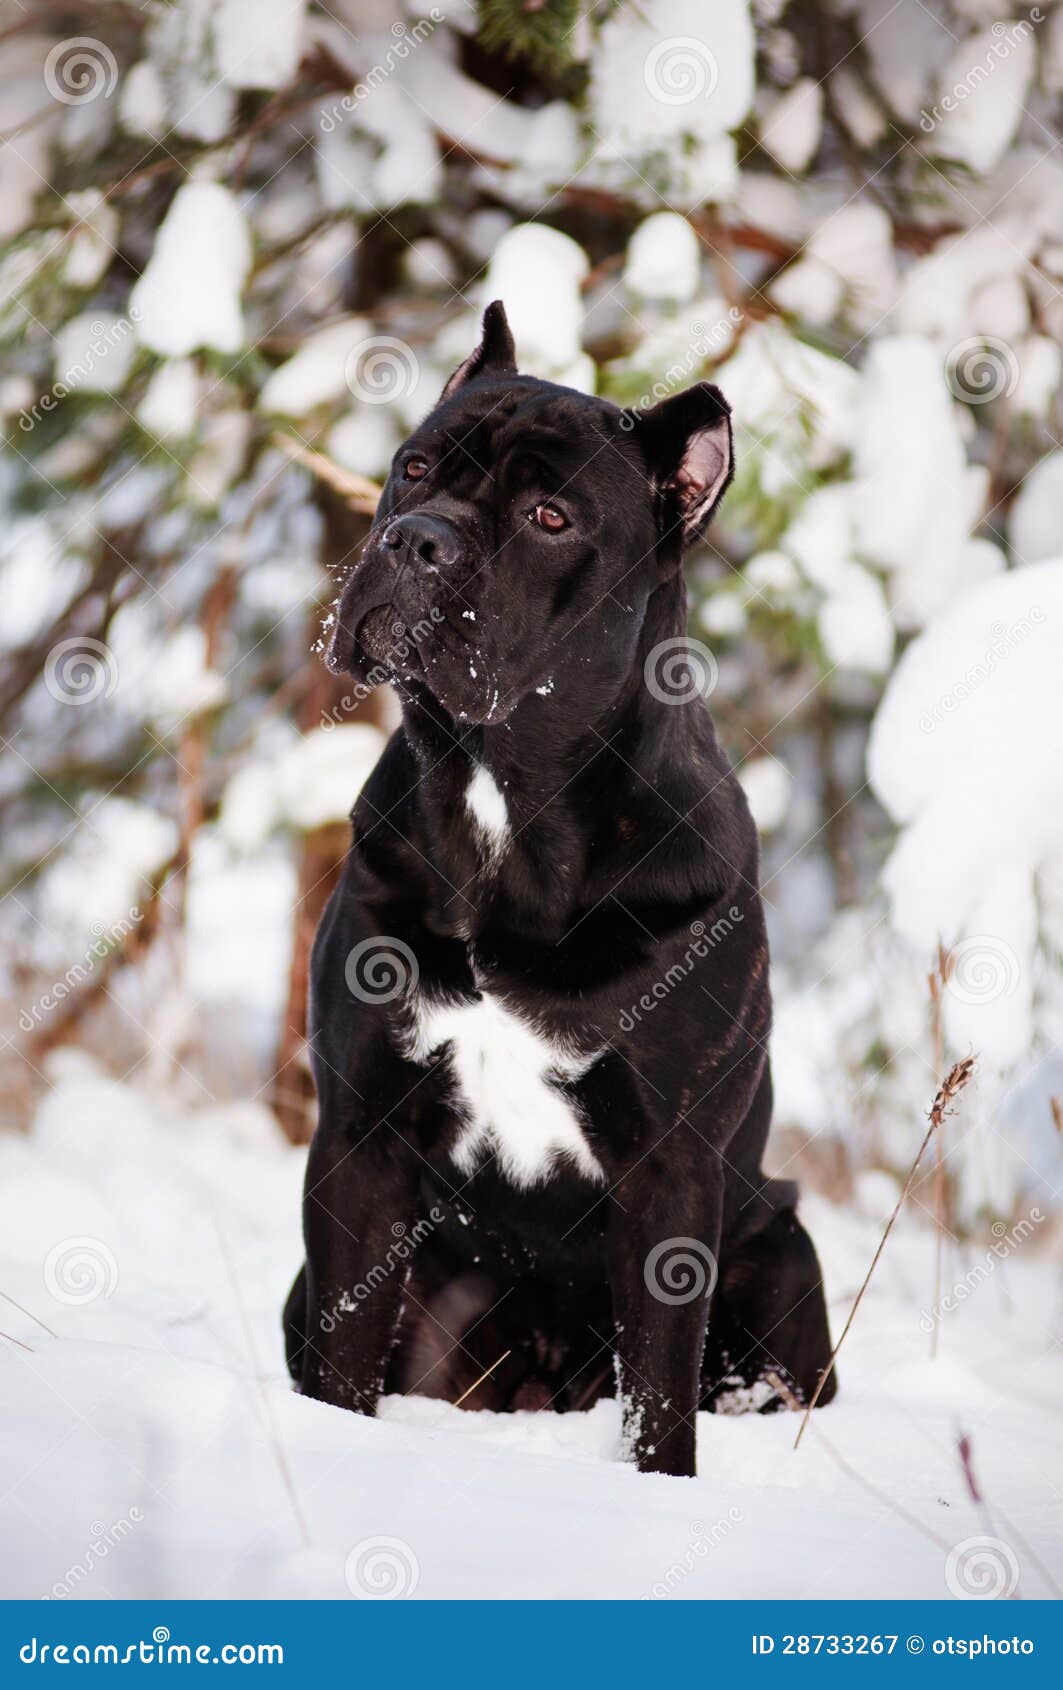 Black Cane Corso Dog In The Snow Royalty Free Stock